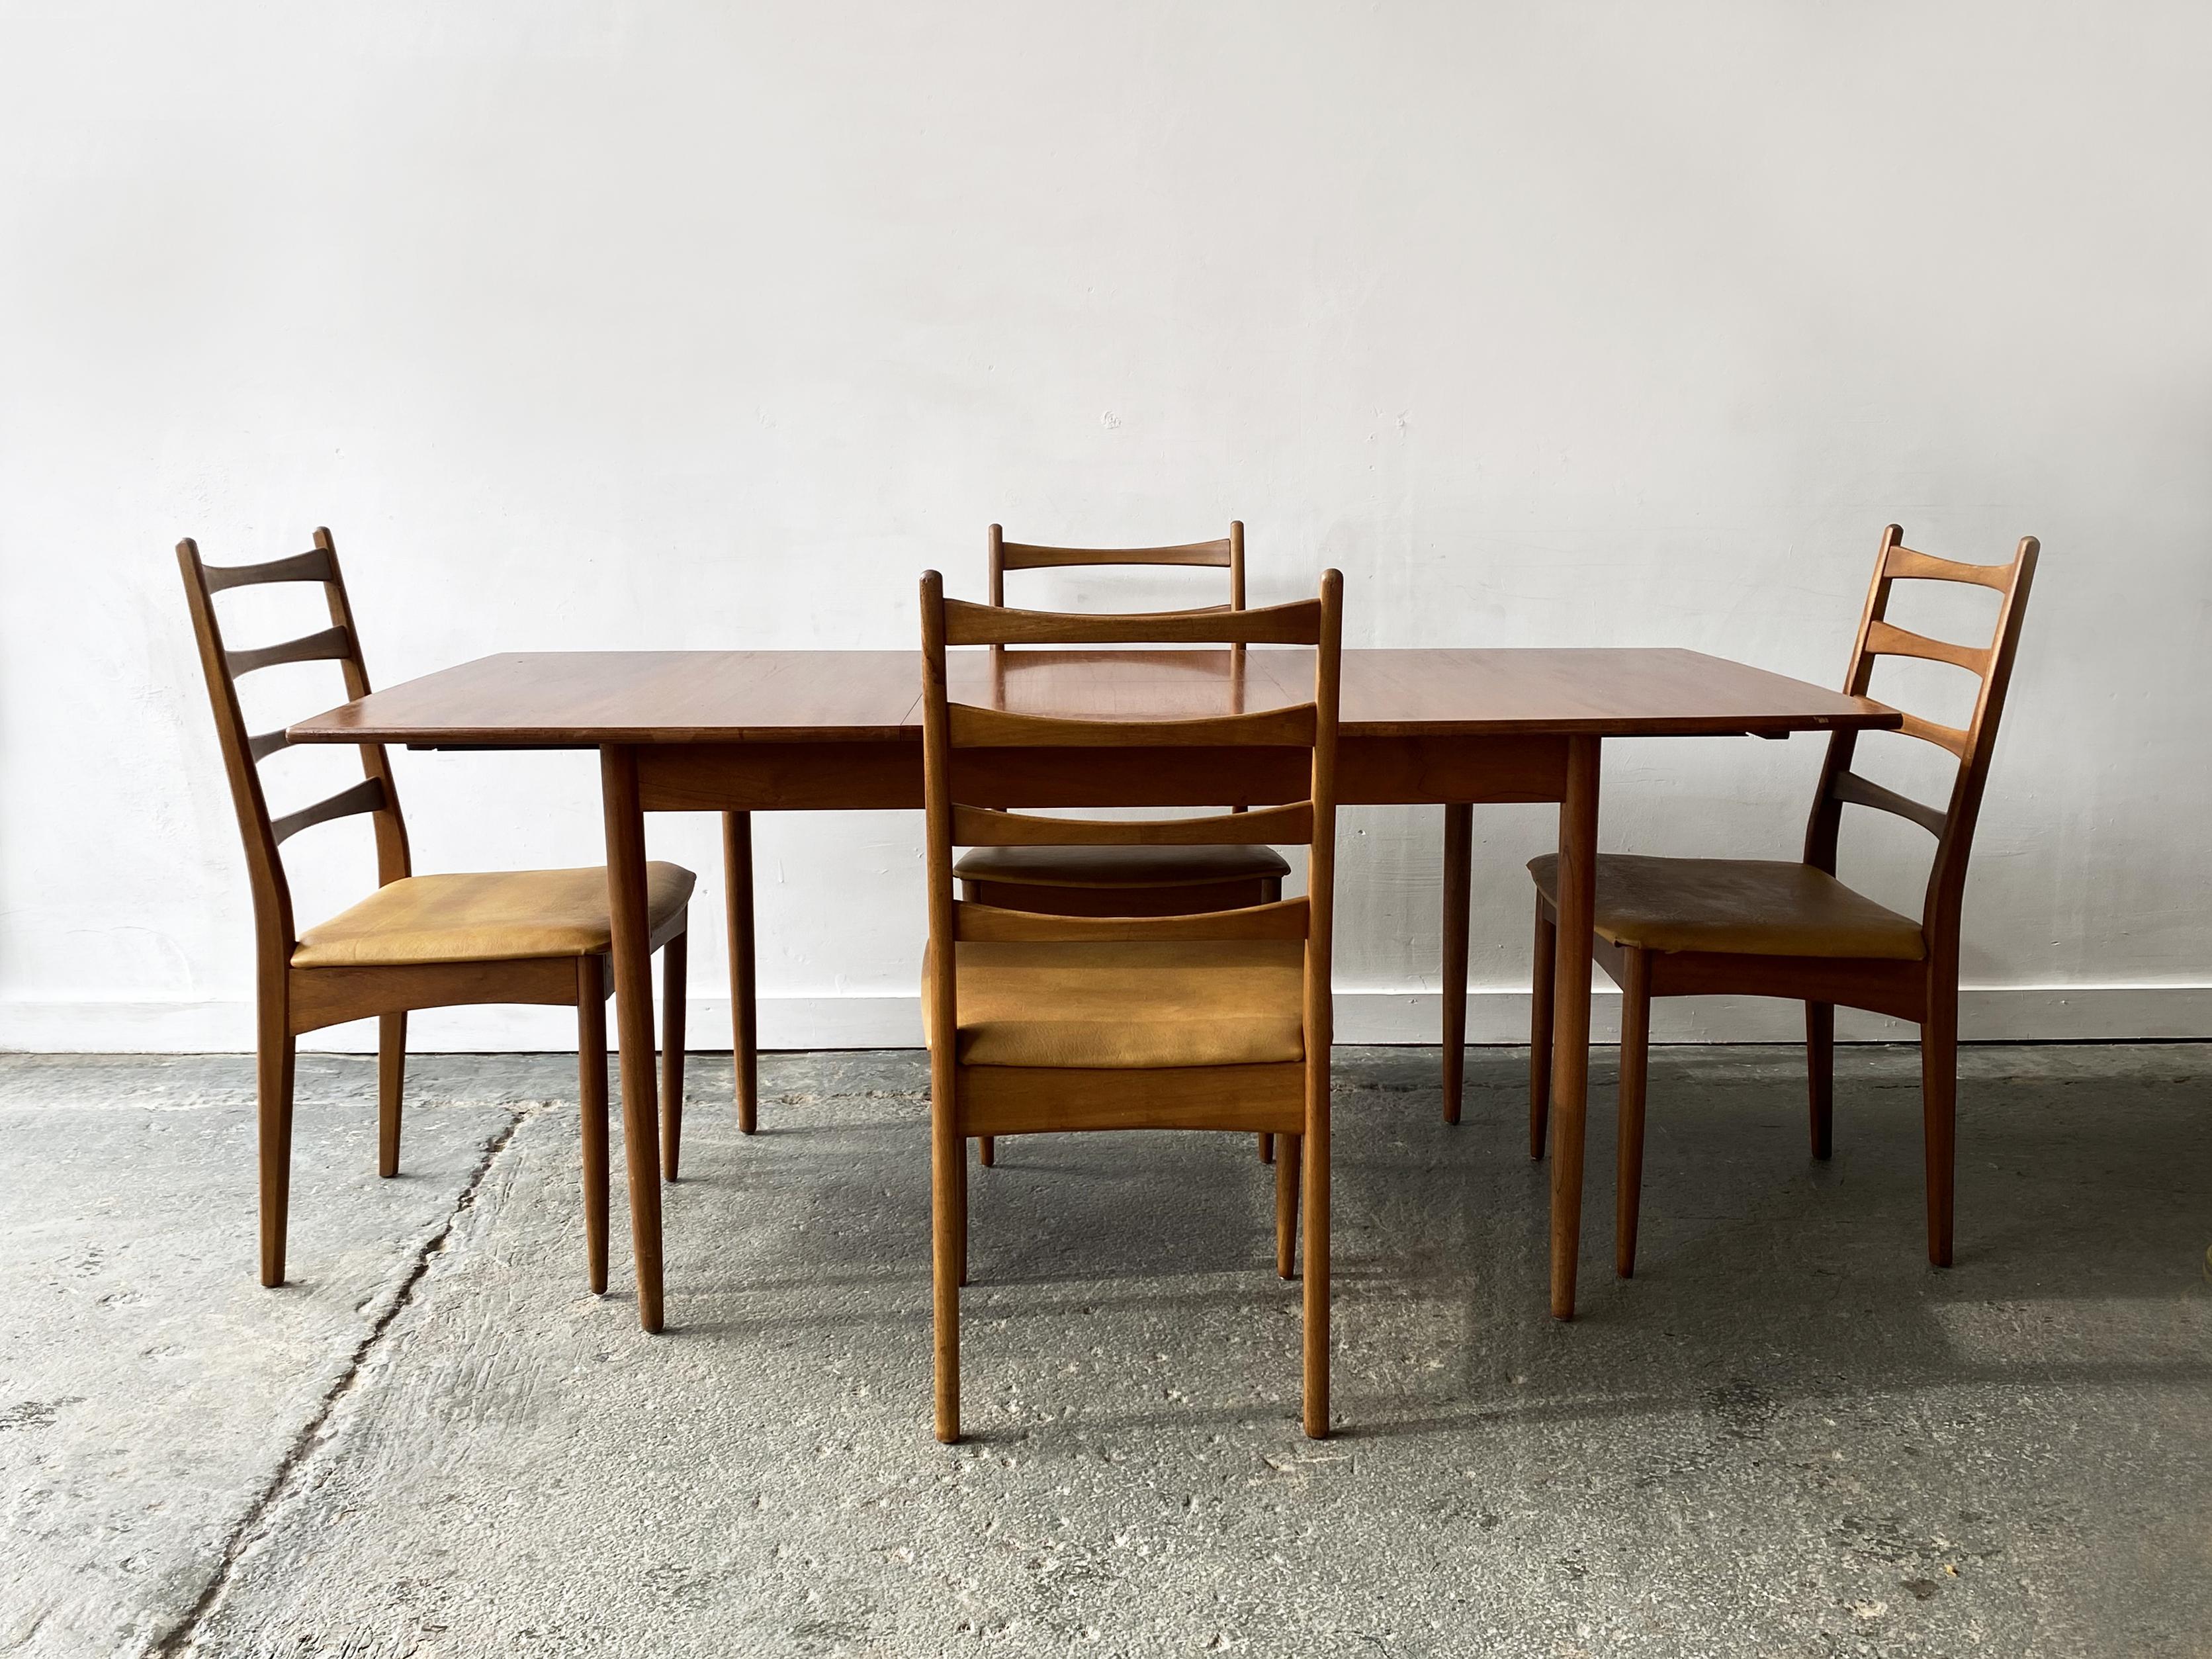 British 1960’s mid century dining table and chair set by Grieves & Thomas